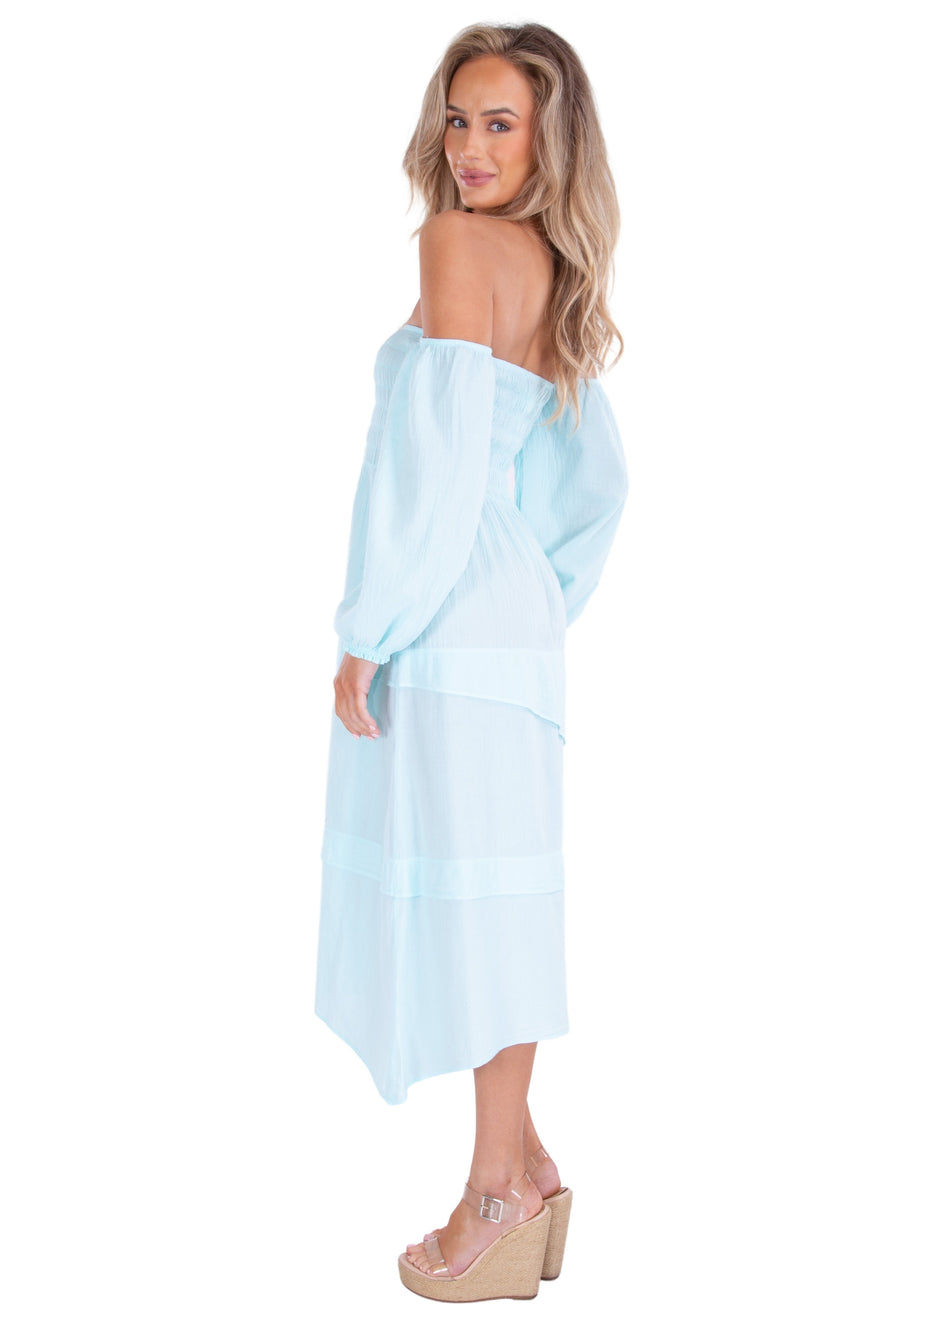 NW1427 - Baby Turquoise Cotton Dress